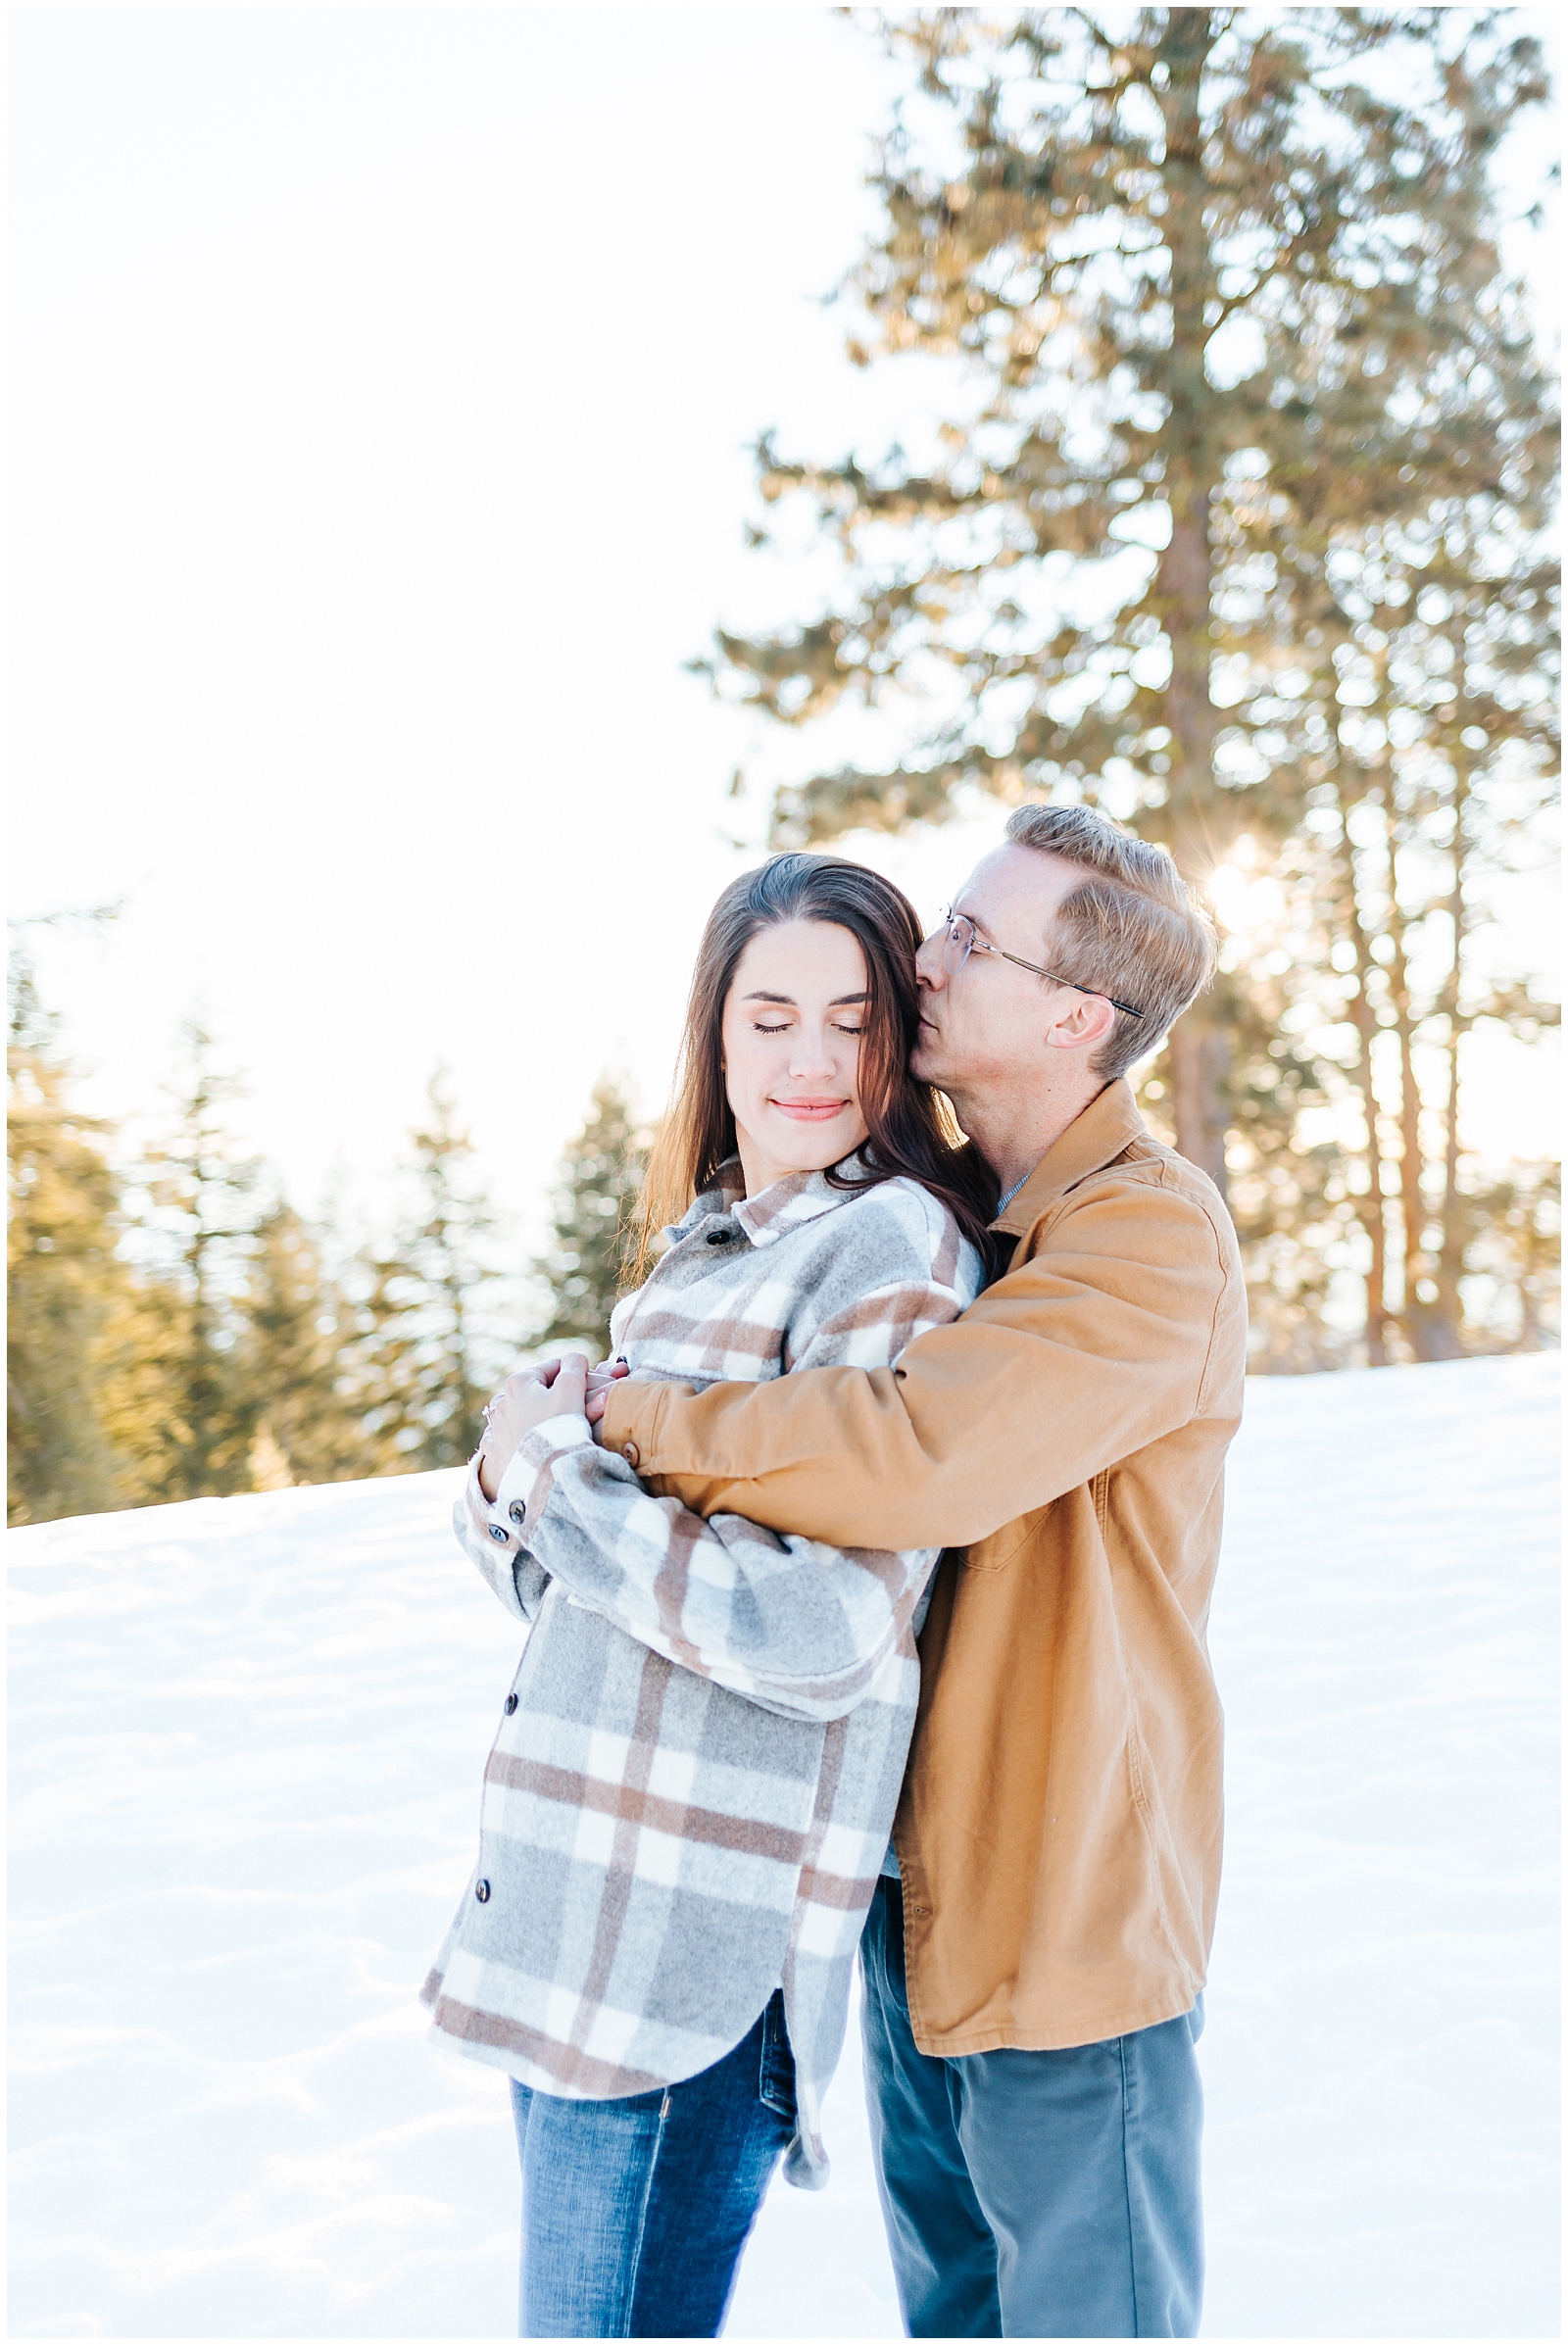 Winter Mountain Engagement Session in the Snow couple in flannels by Karli and David Photography 